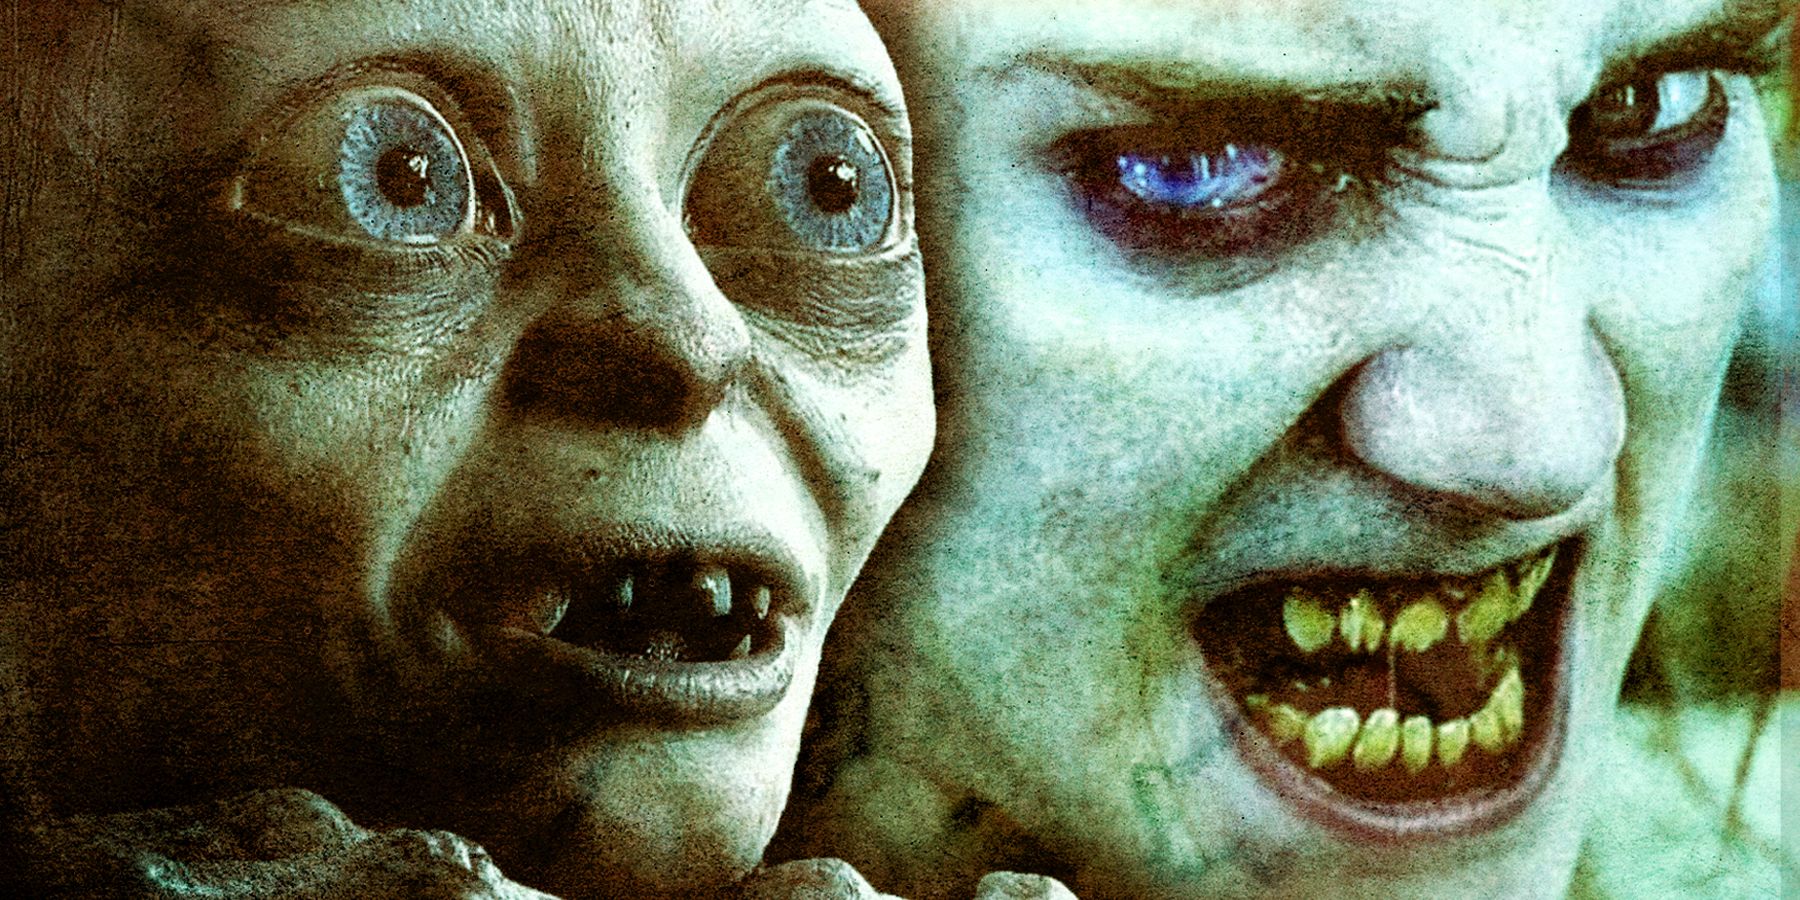 Altaar methaan saai A Lord of the Rings Deleted Scene Almost Turned Frodo Into Gollum